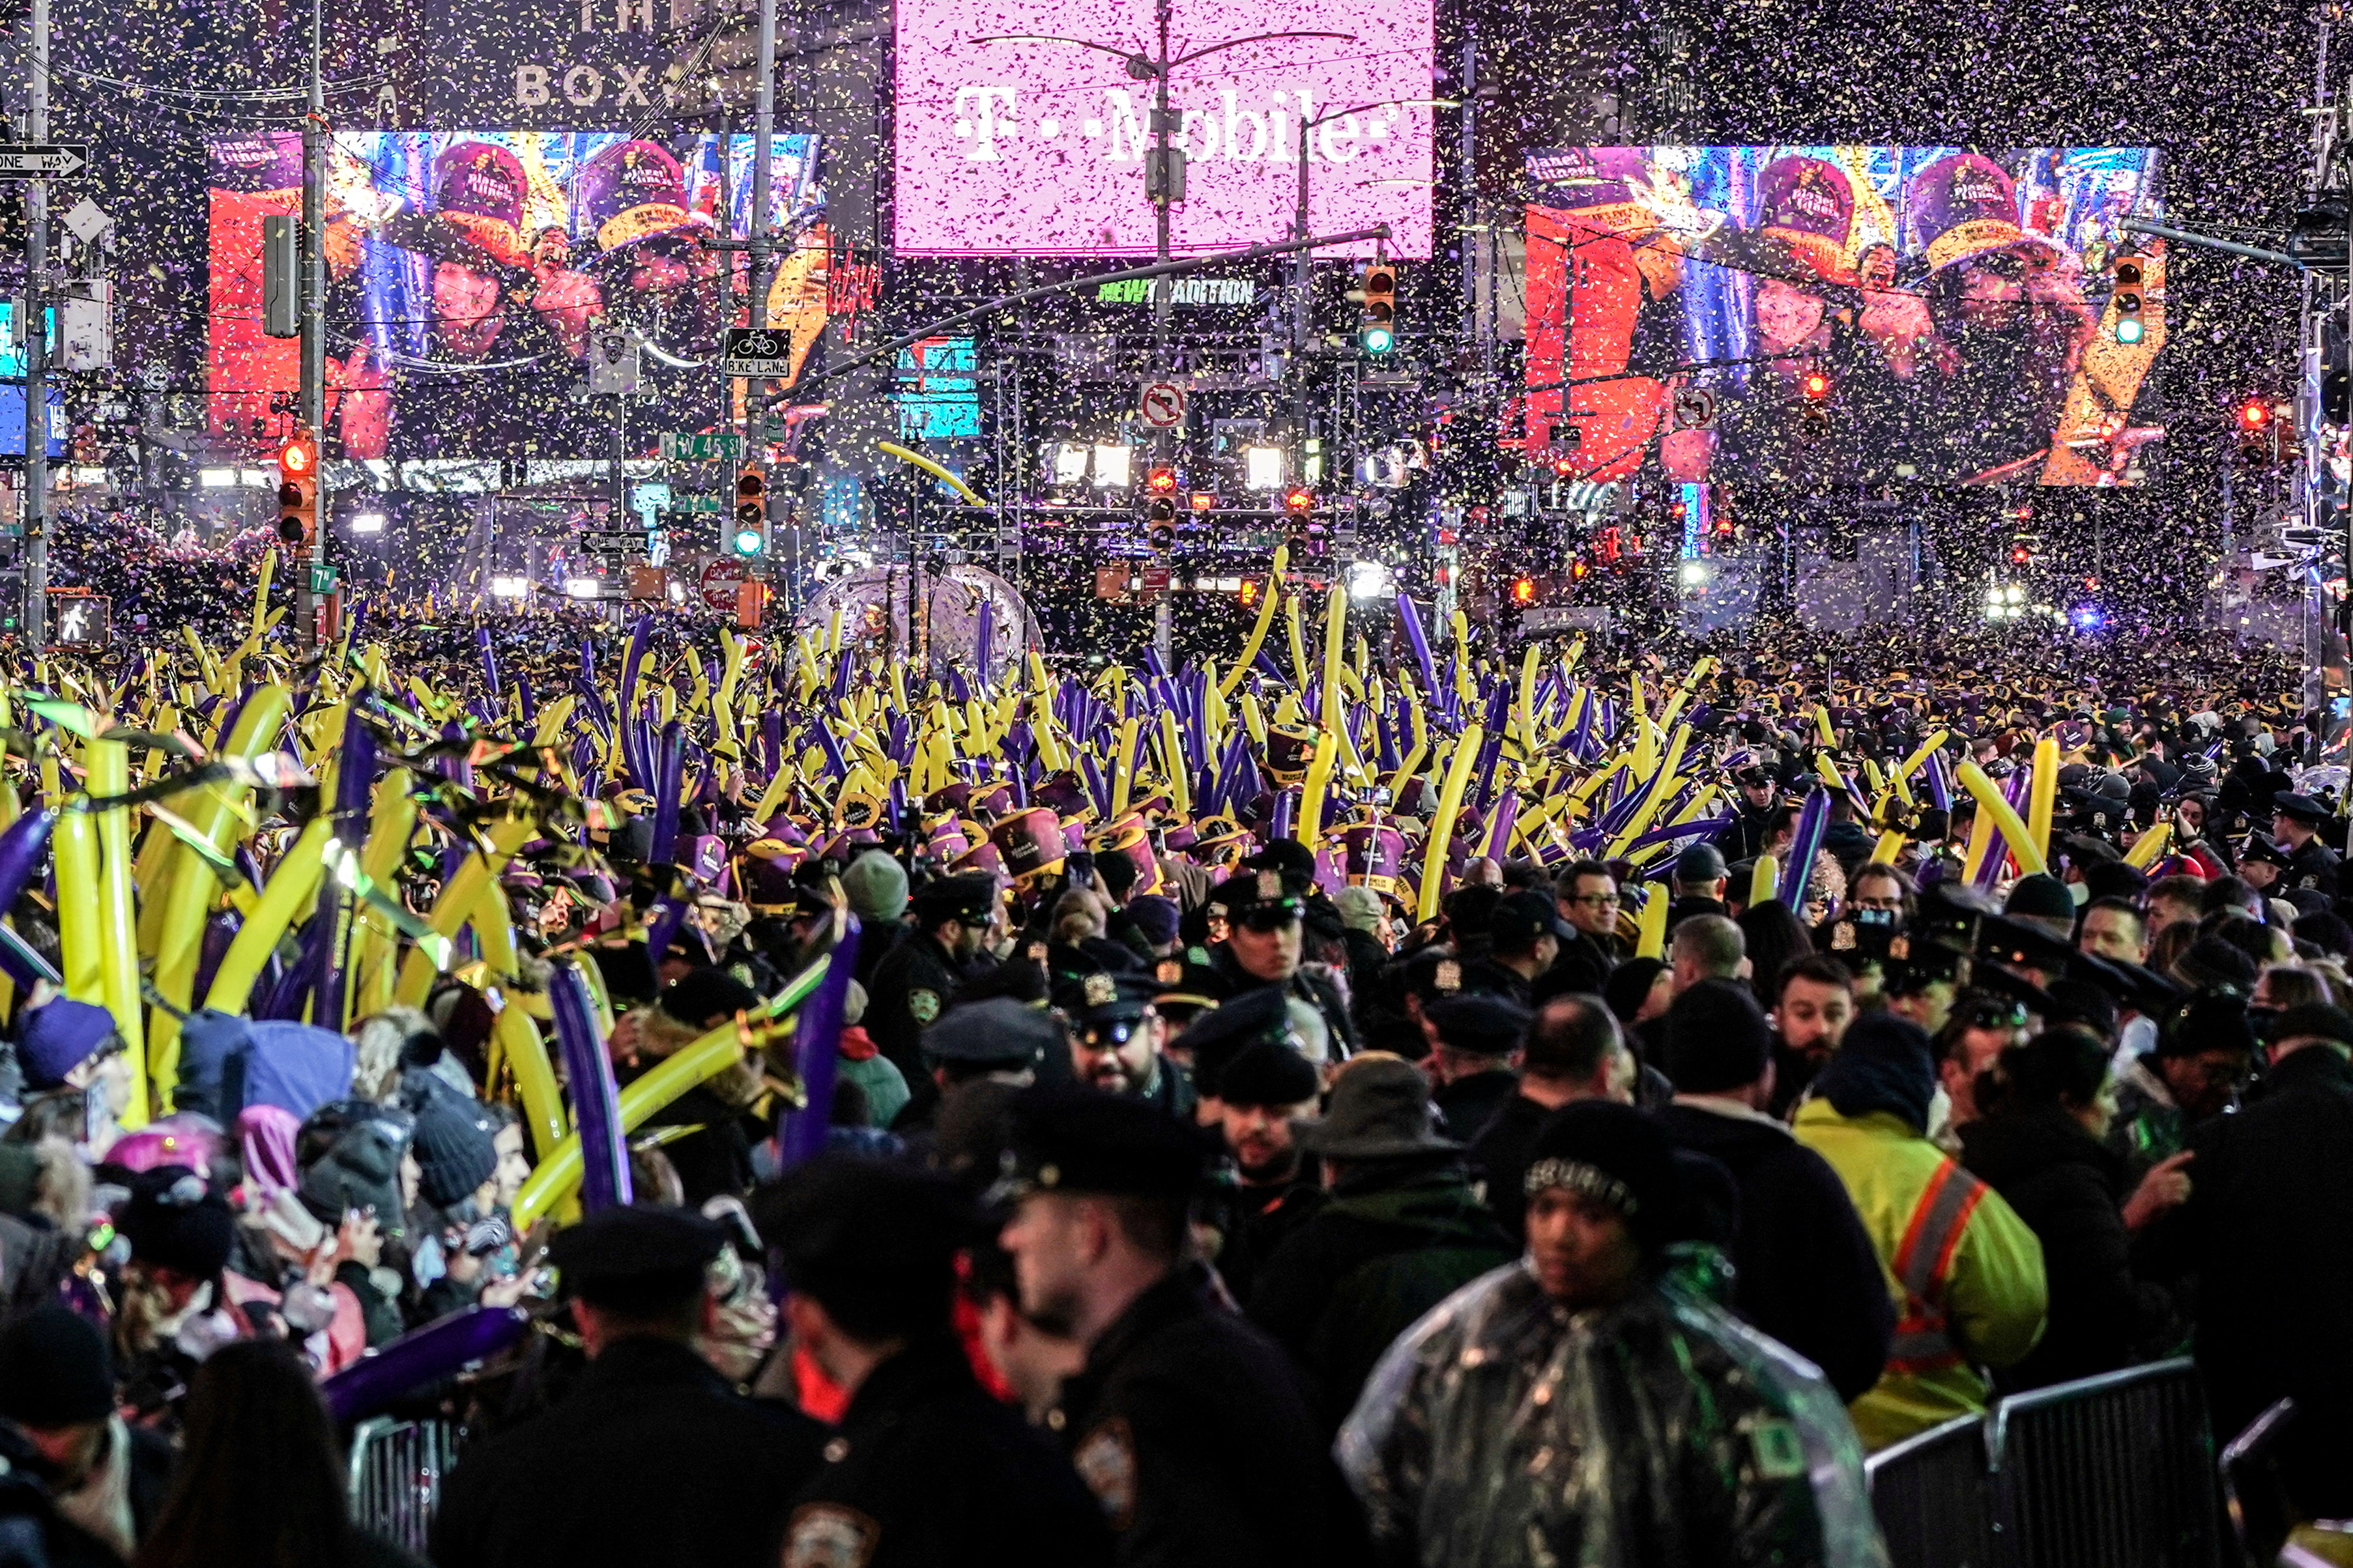 Revelers celebrate New Year's Eve in Times Square in the Manhattan borough of New York City